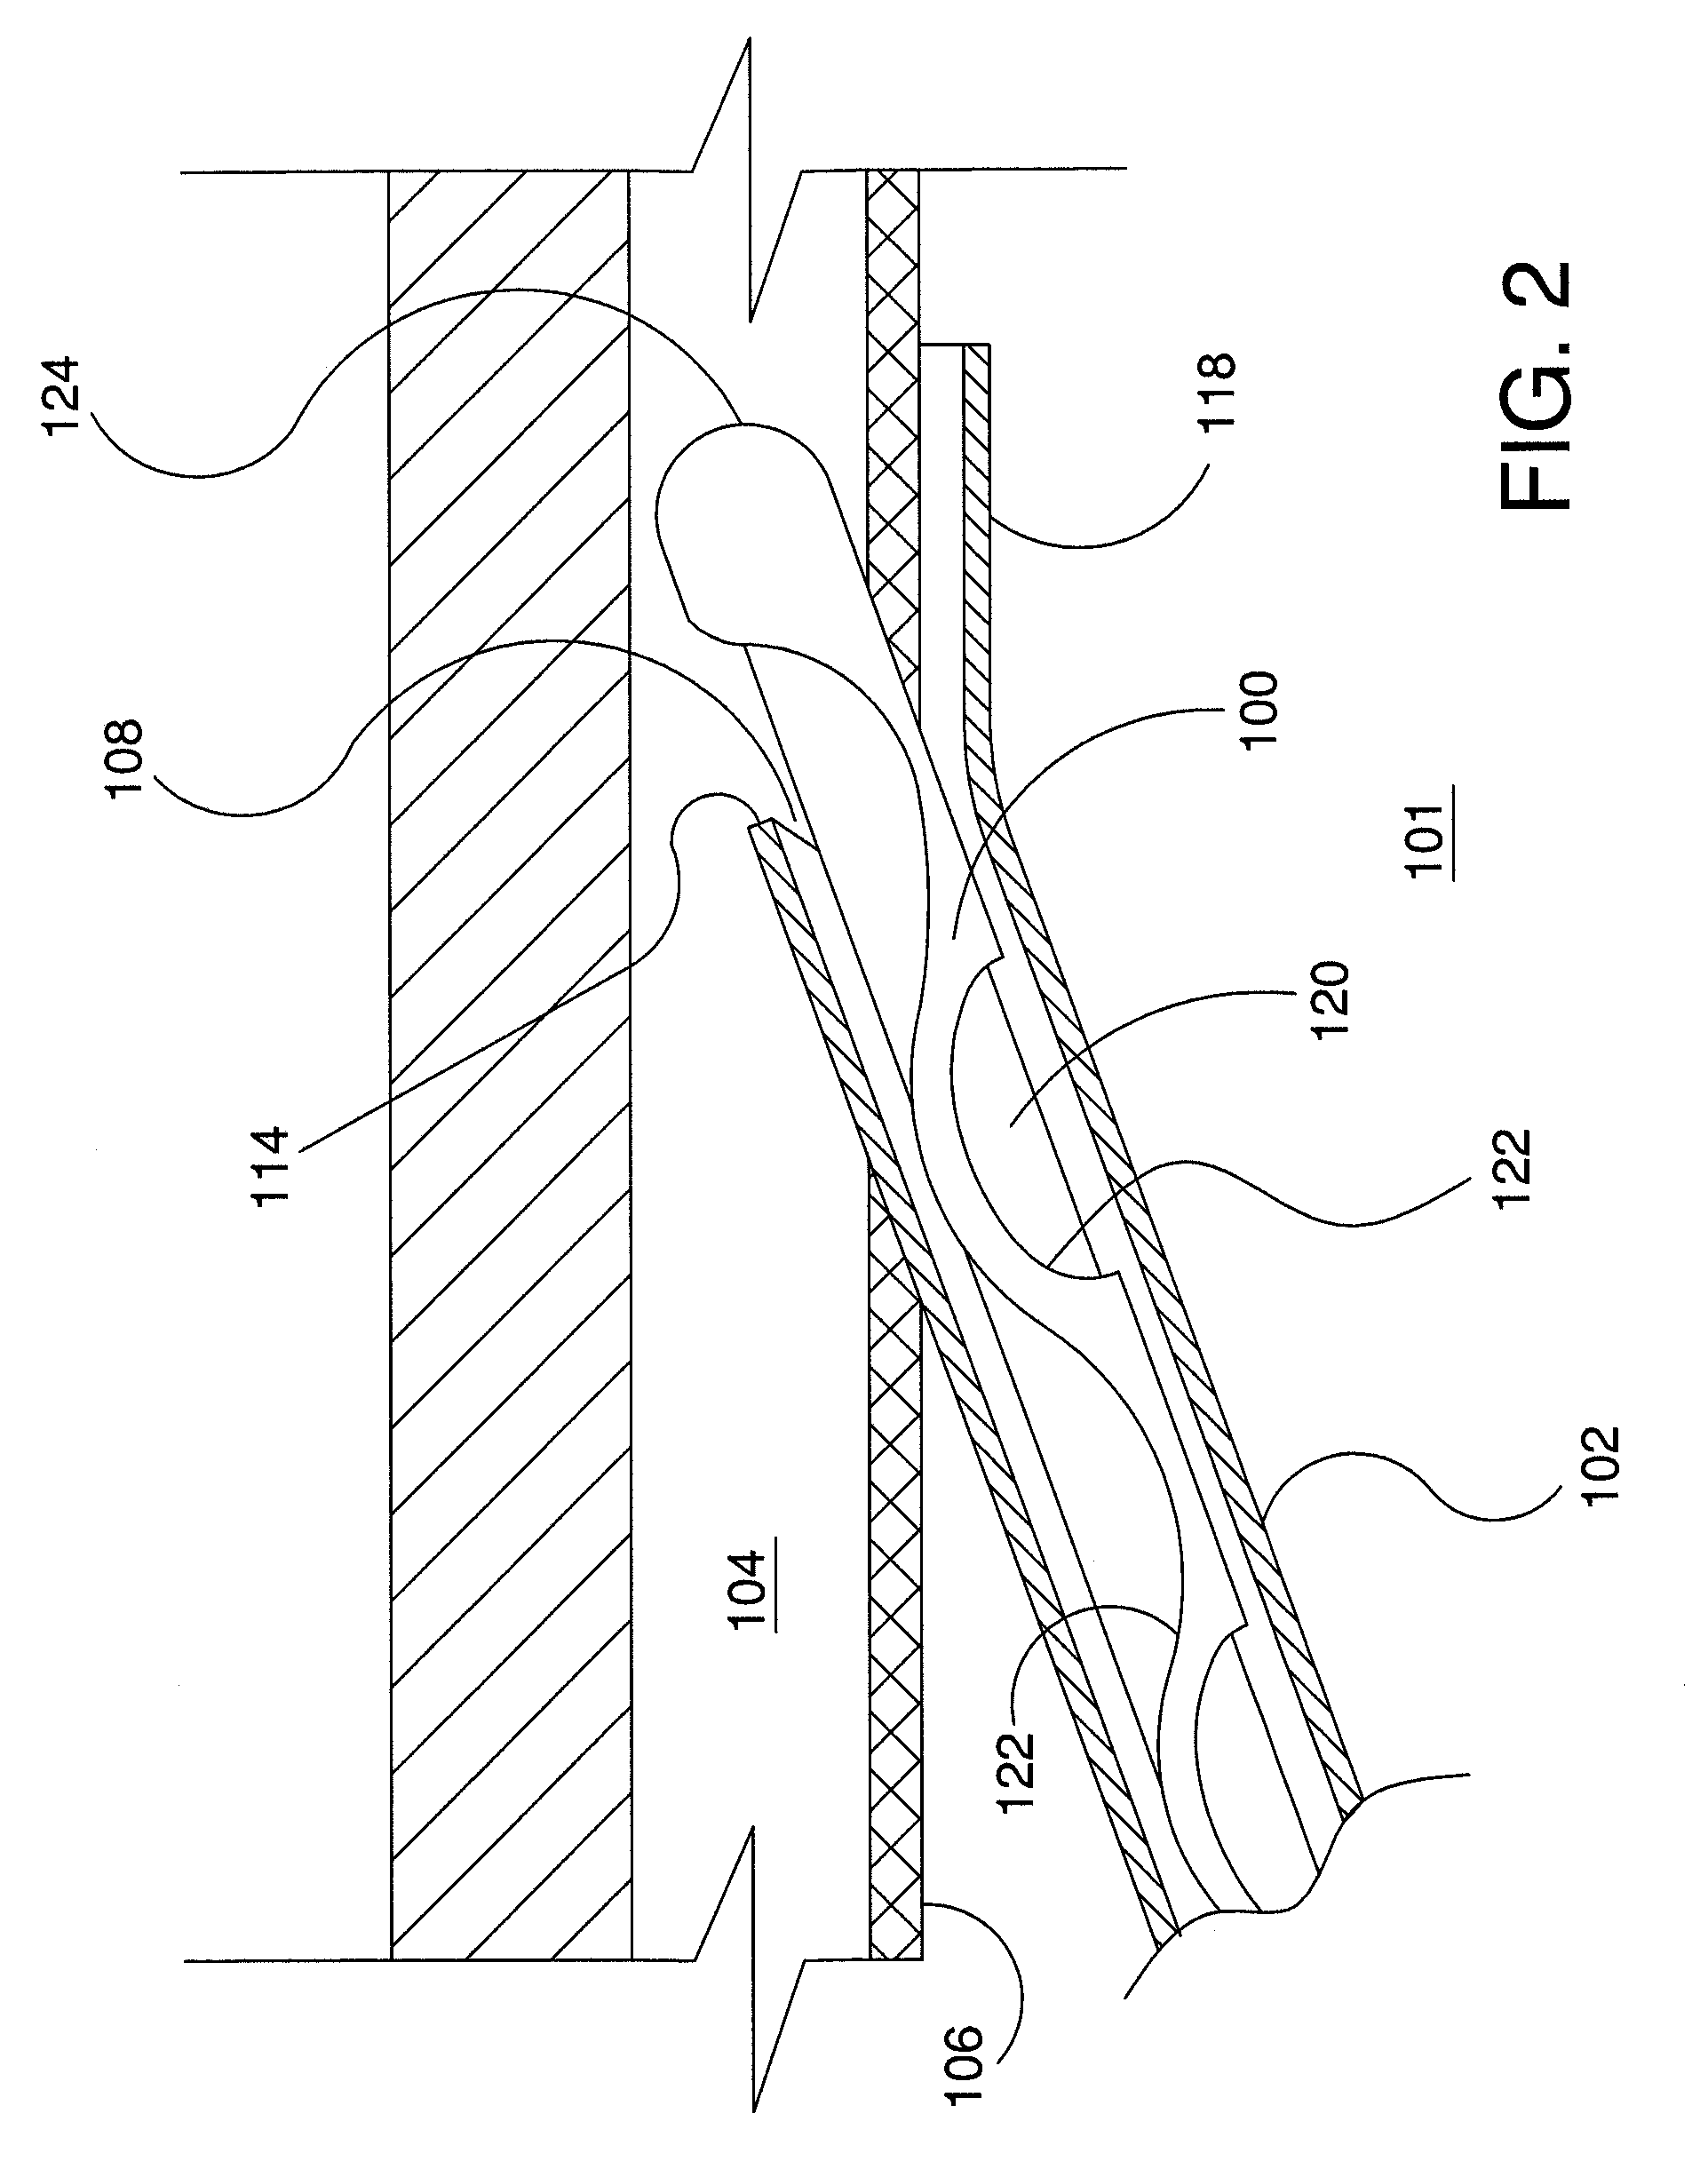 Ocular implant delivery system and method